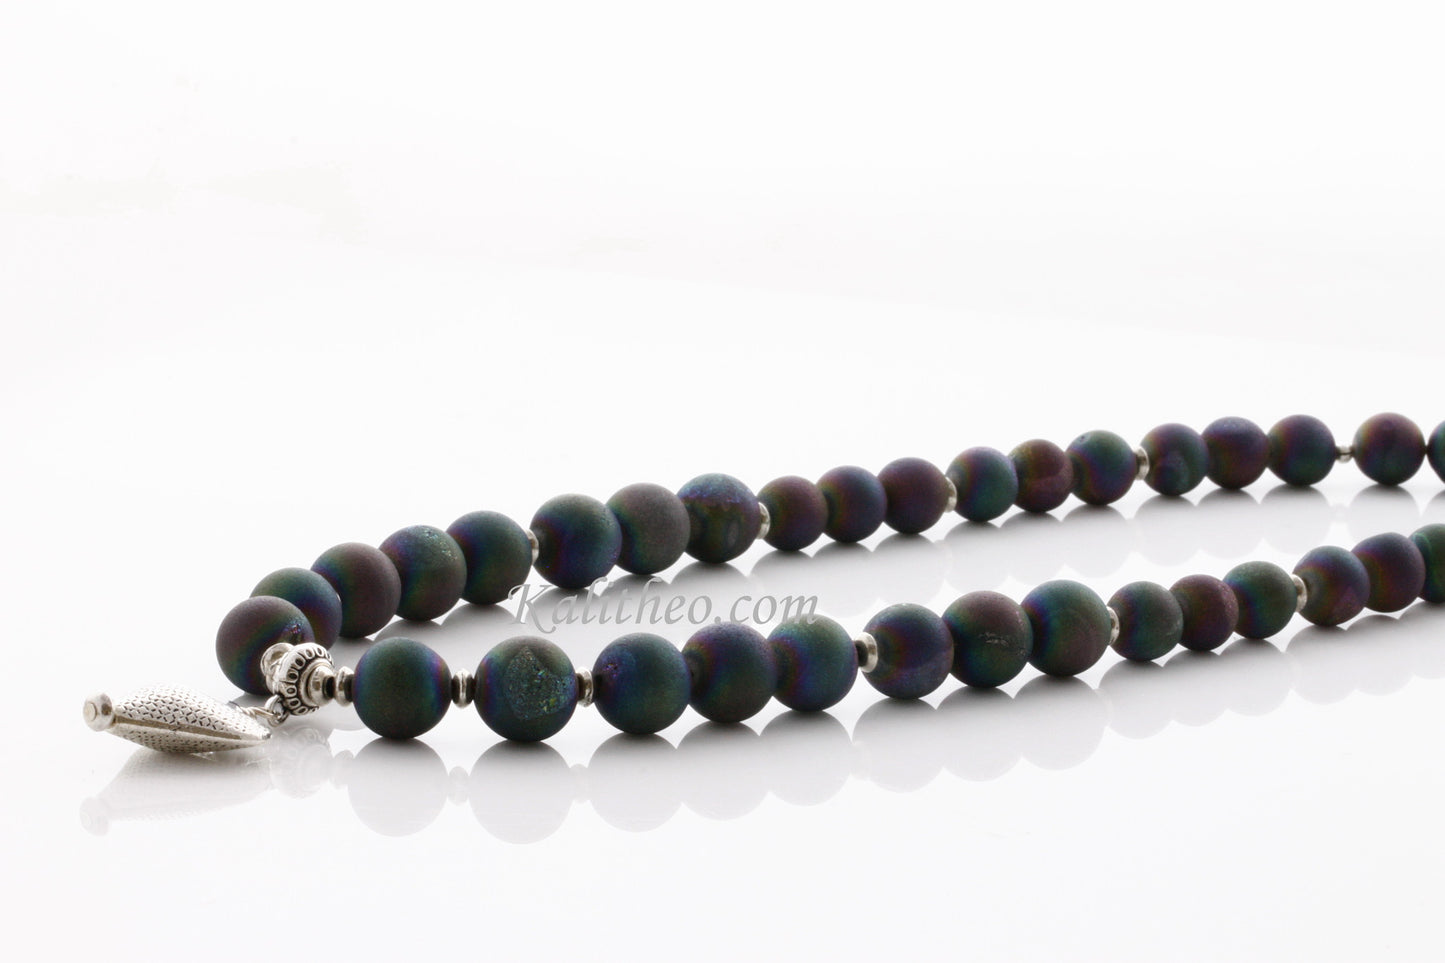 KTC-240 "Peacock Glamour" Agate Necklace - Kalitheo Jewellery